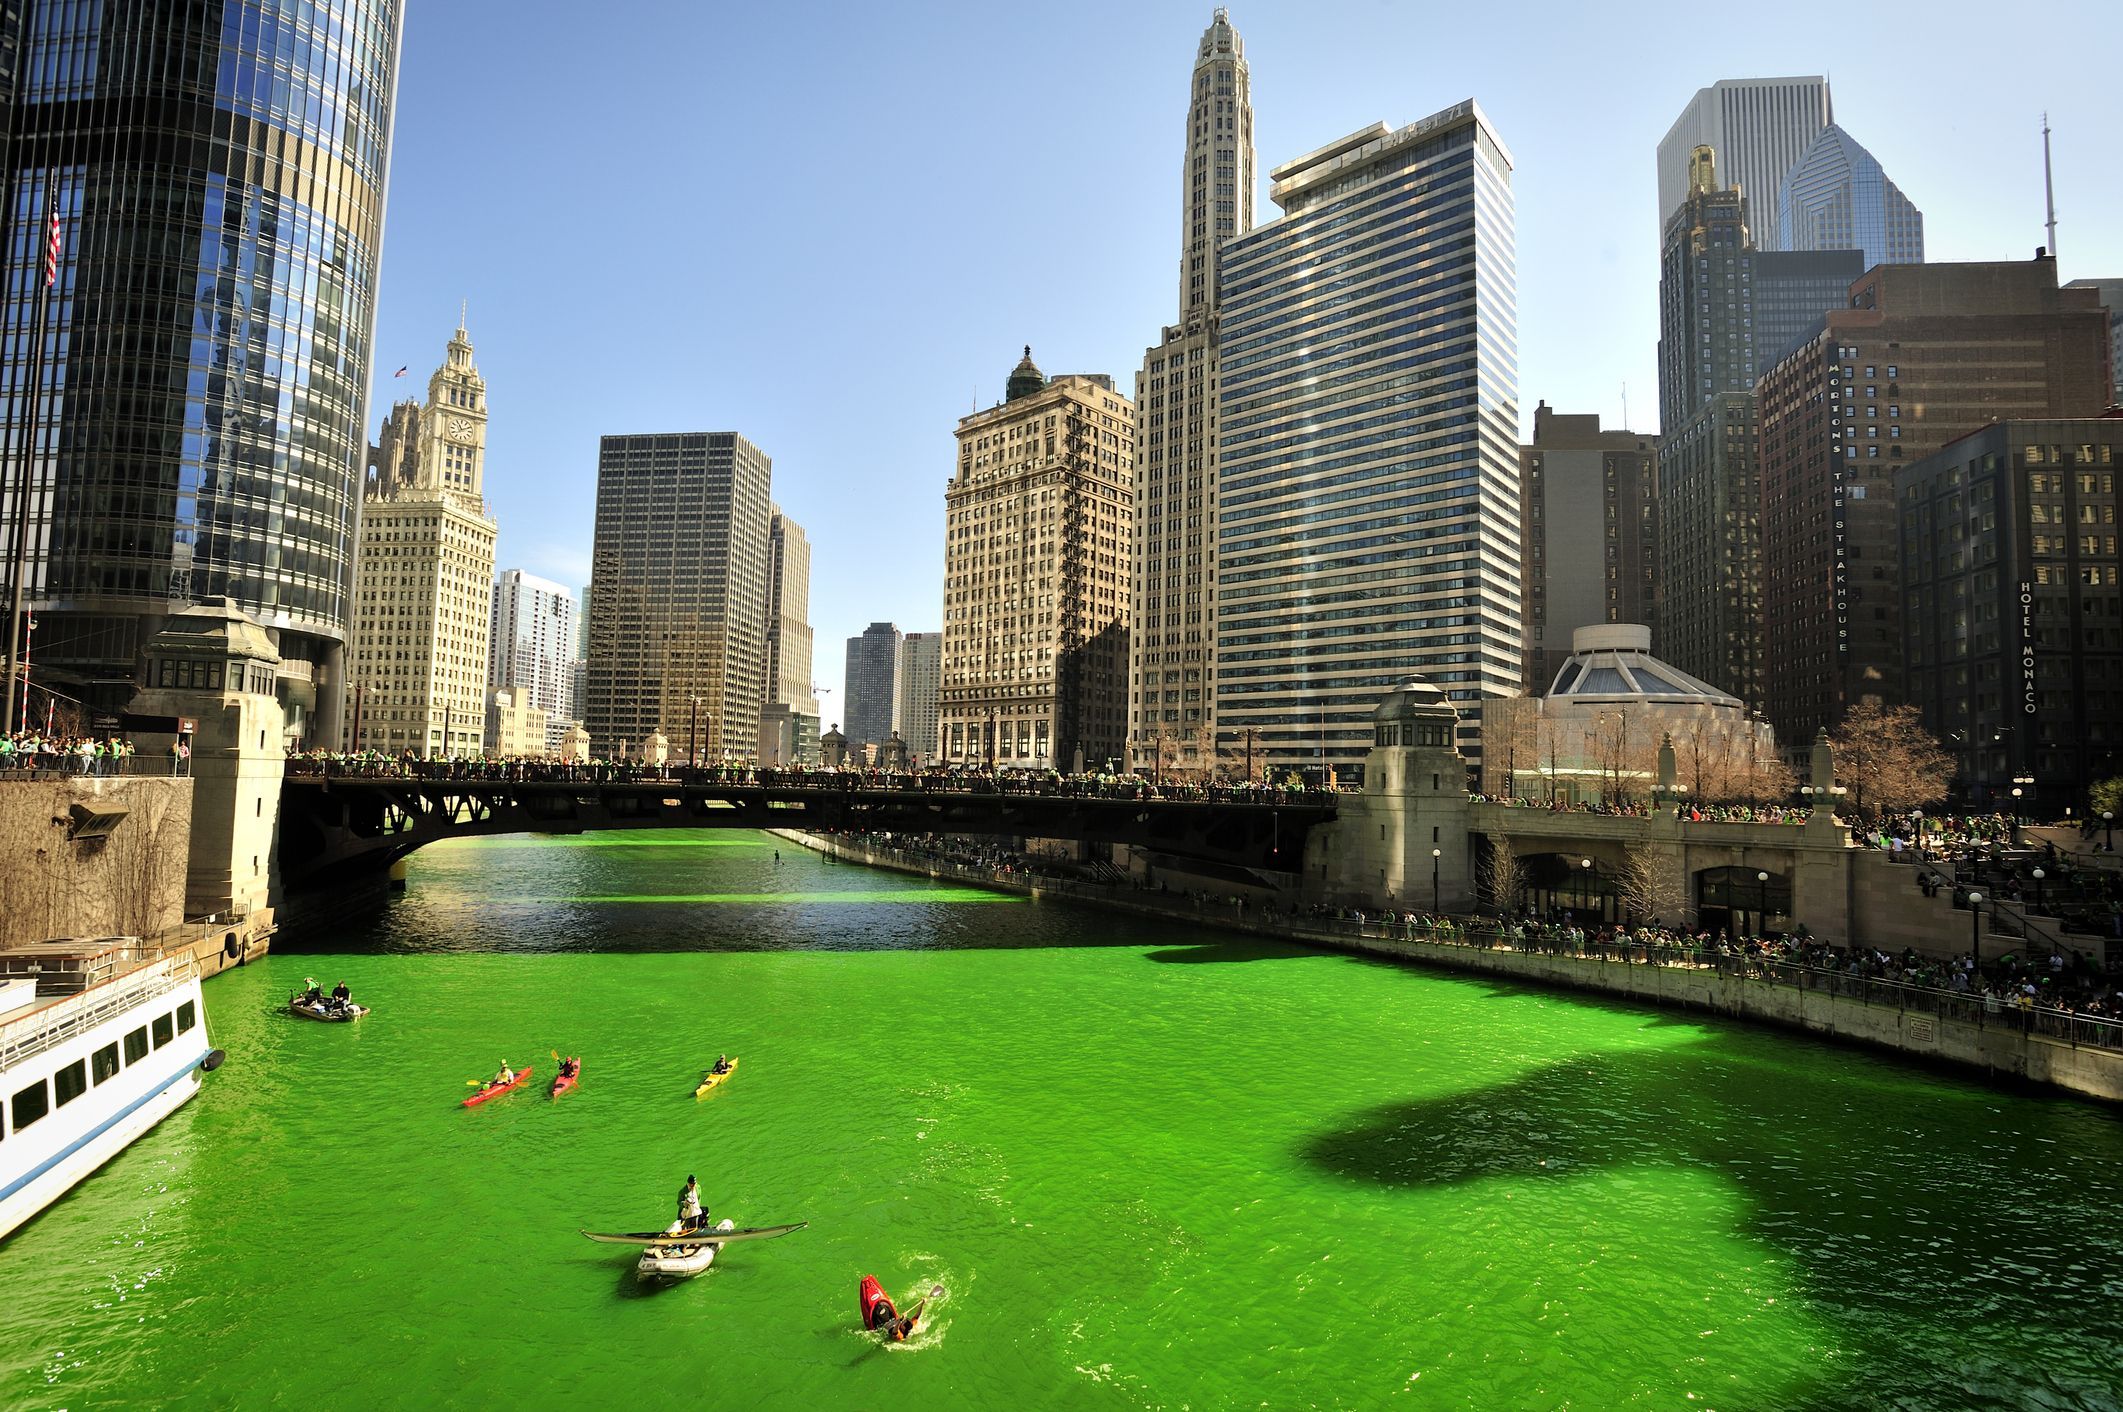 What Is St. Patrick's Day? The History of the March 17 Holiday